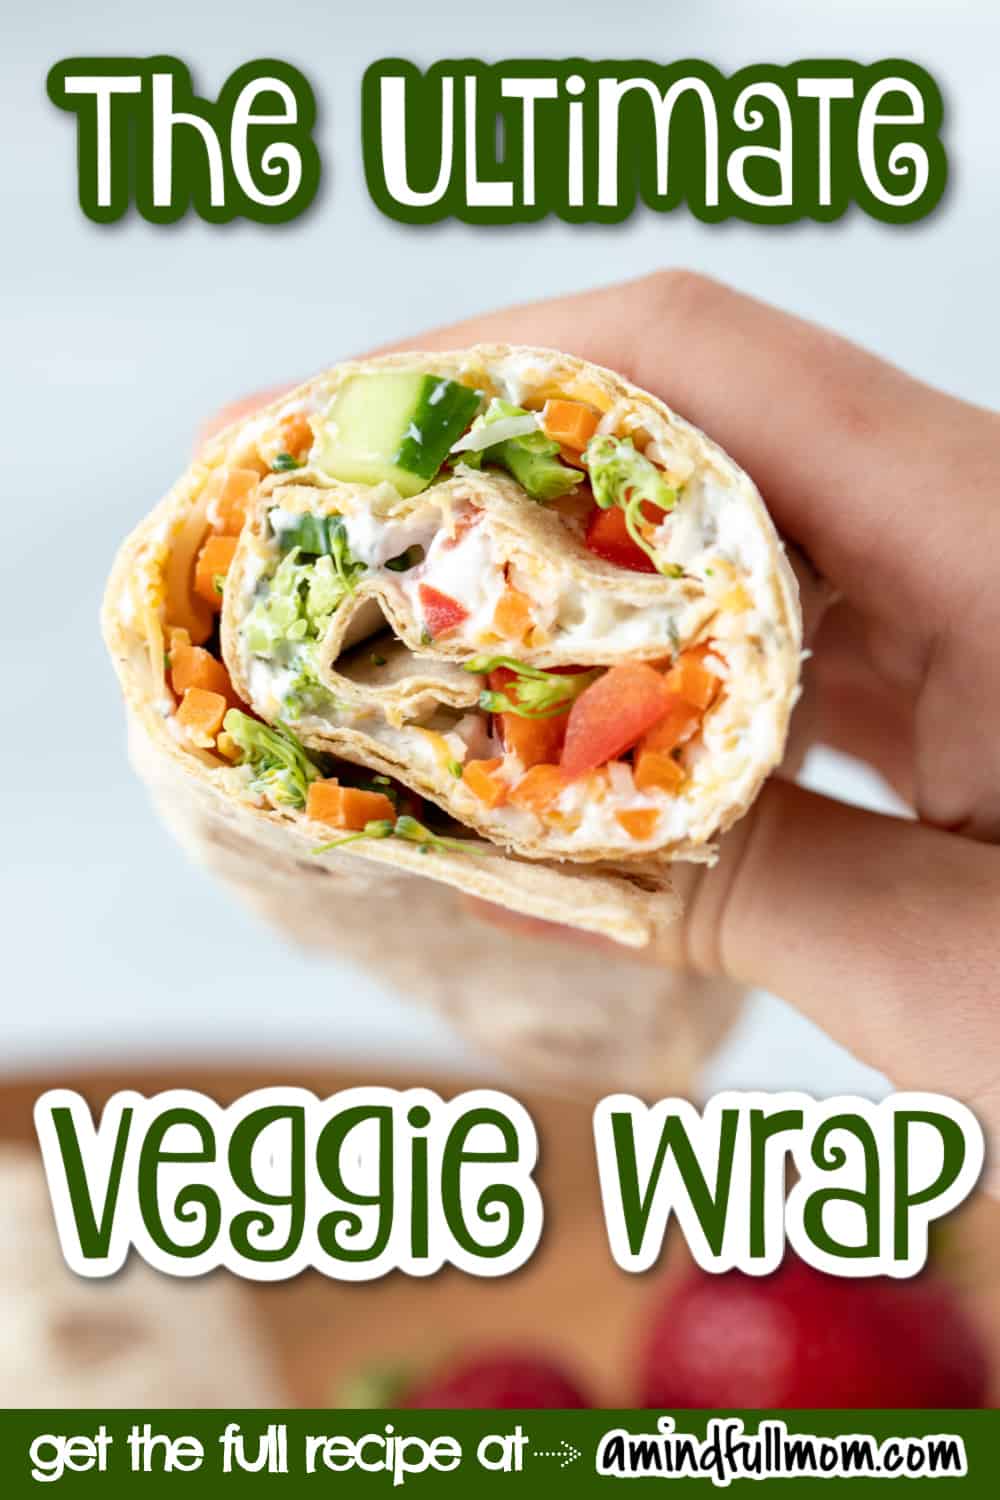 Made with a creamy ranch spread, crisp vegetables, and sharp shredded cheese, this Veggie Wrap makes a simple, yet delicious lunch.